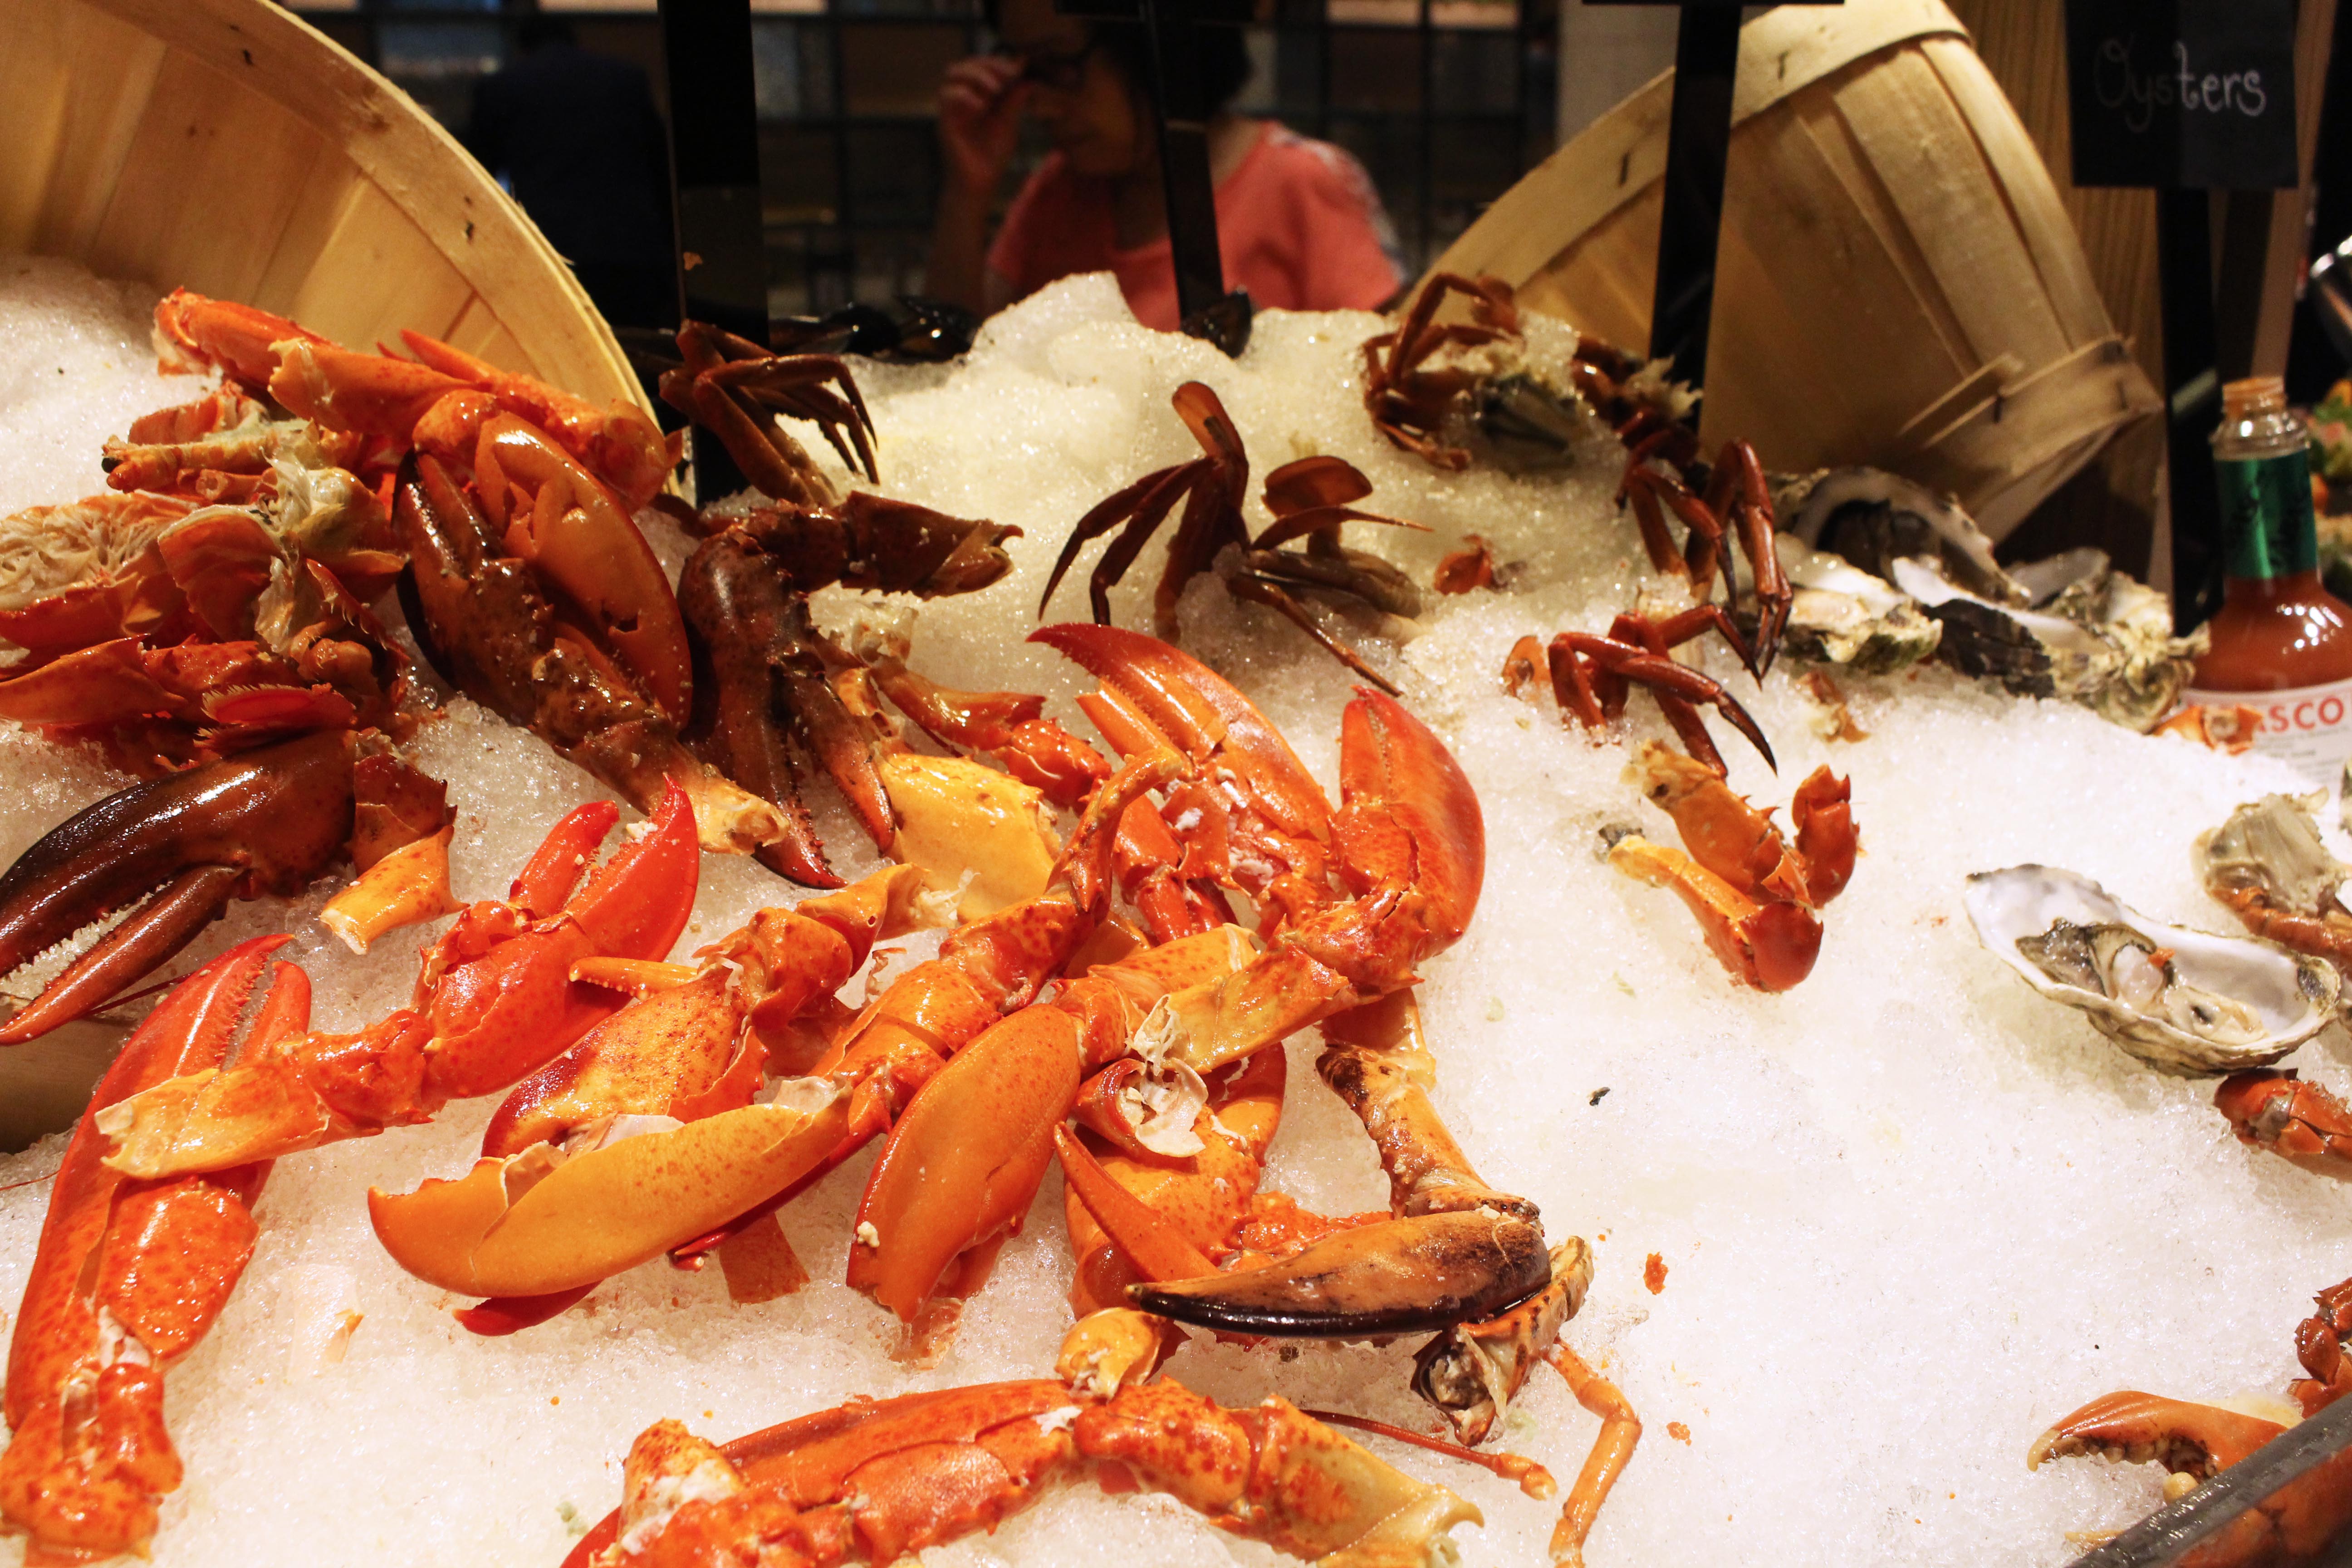 Unlimited servings of fresh seafood such as lobster, crabs, mussels and prawns are available for dinner.